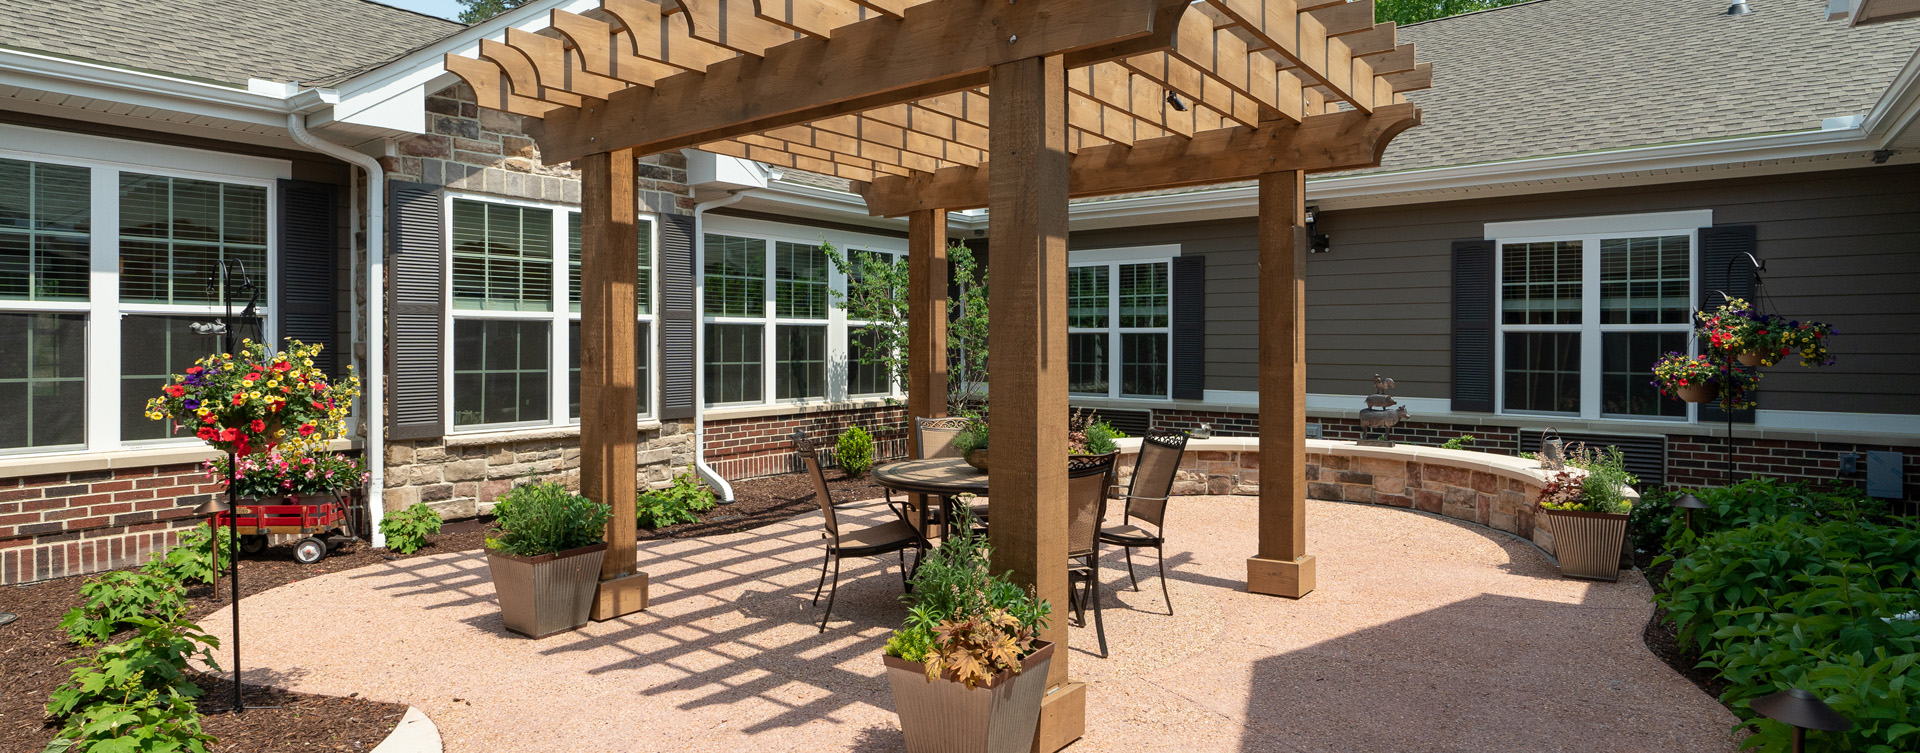 Residents with dementia can enjoy a traveling path, relaxed seating and raised garden beds in the courtyard at Bickford of Chesapeake